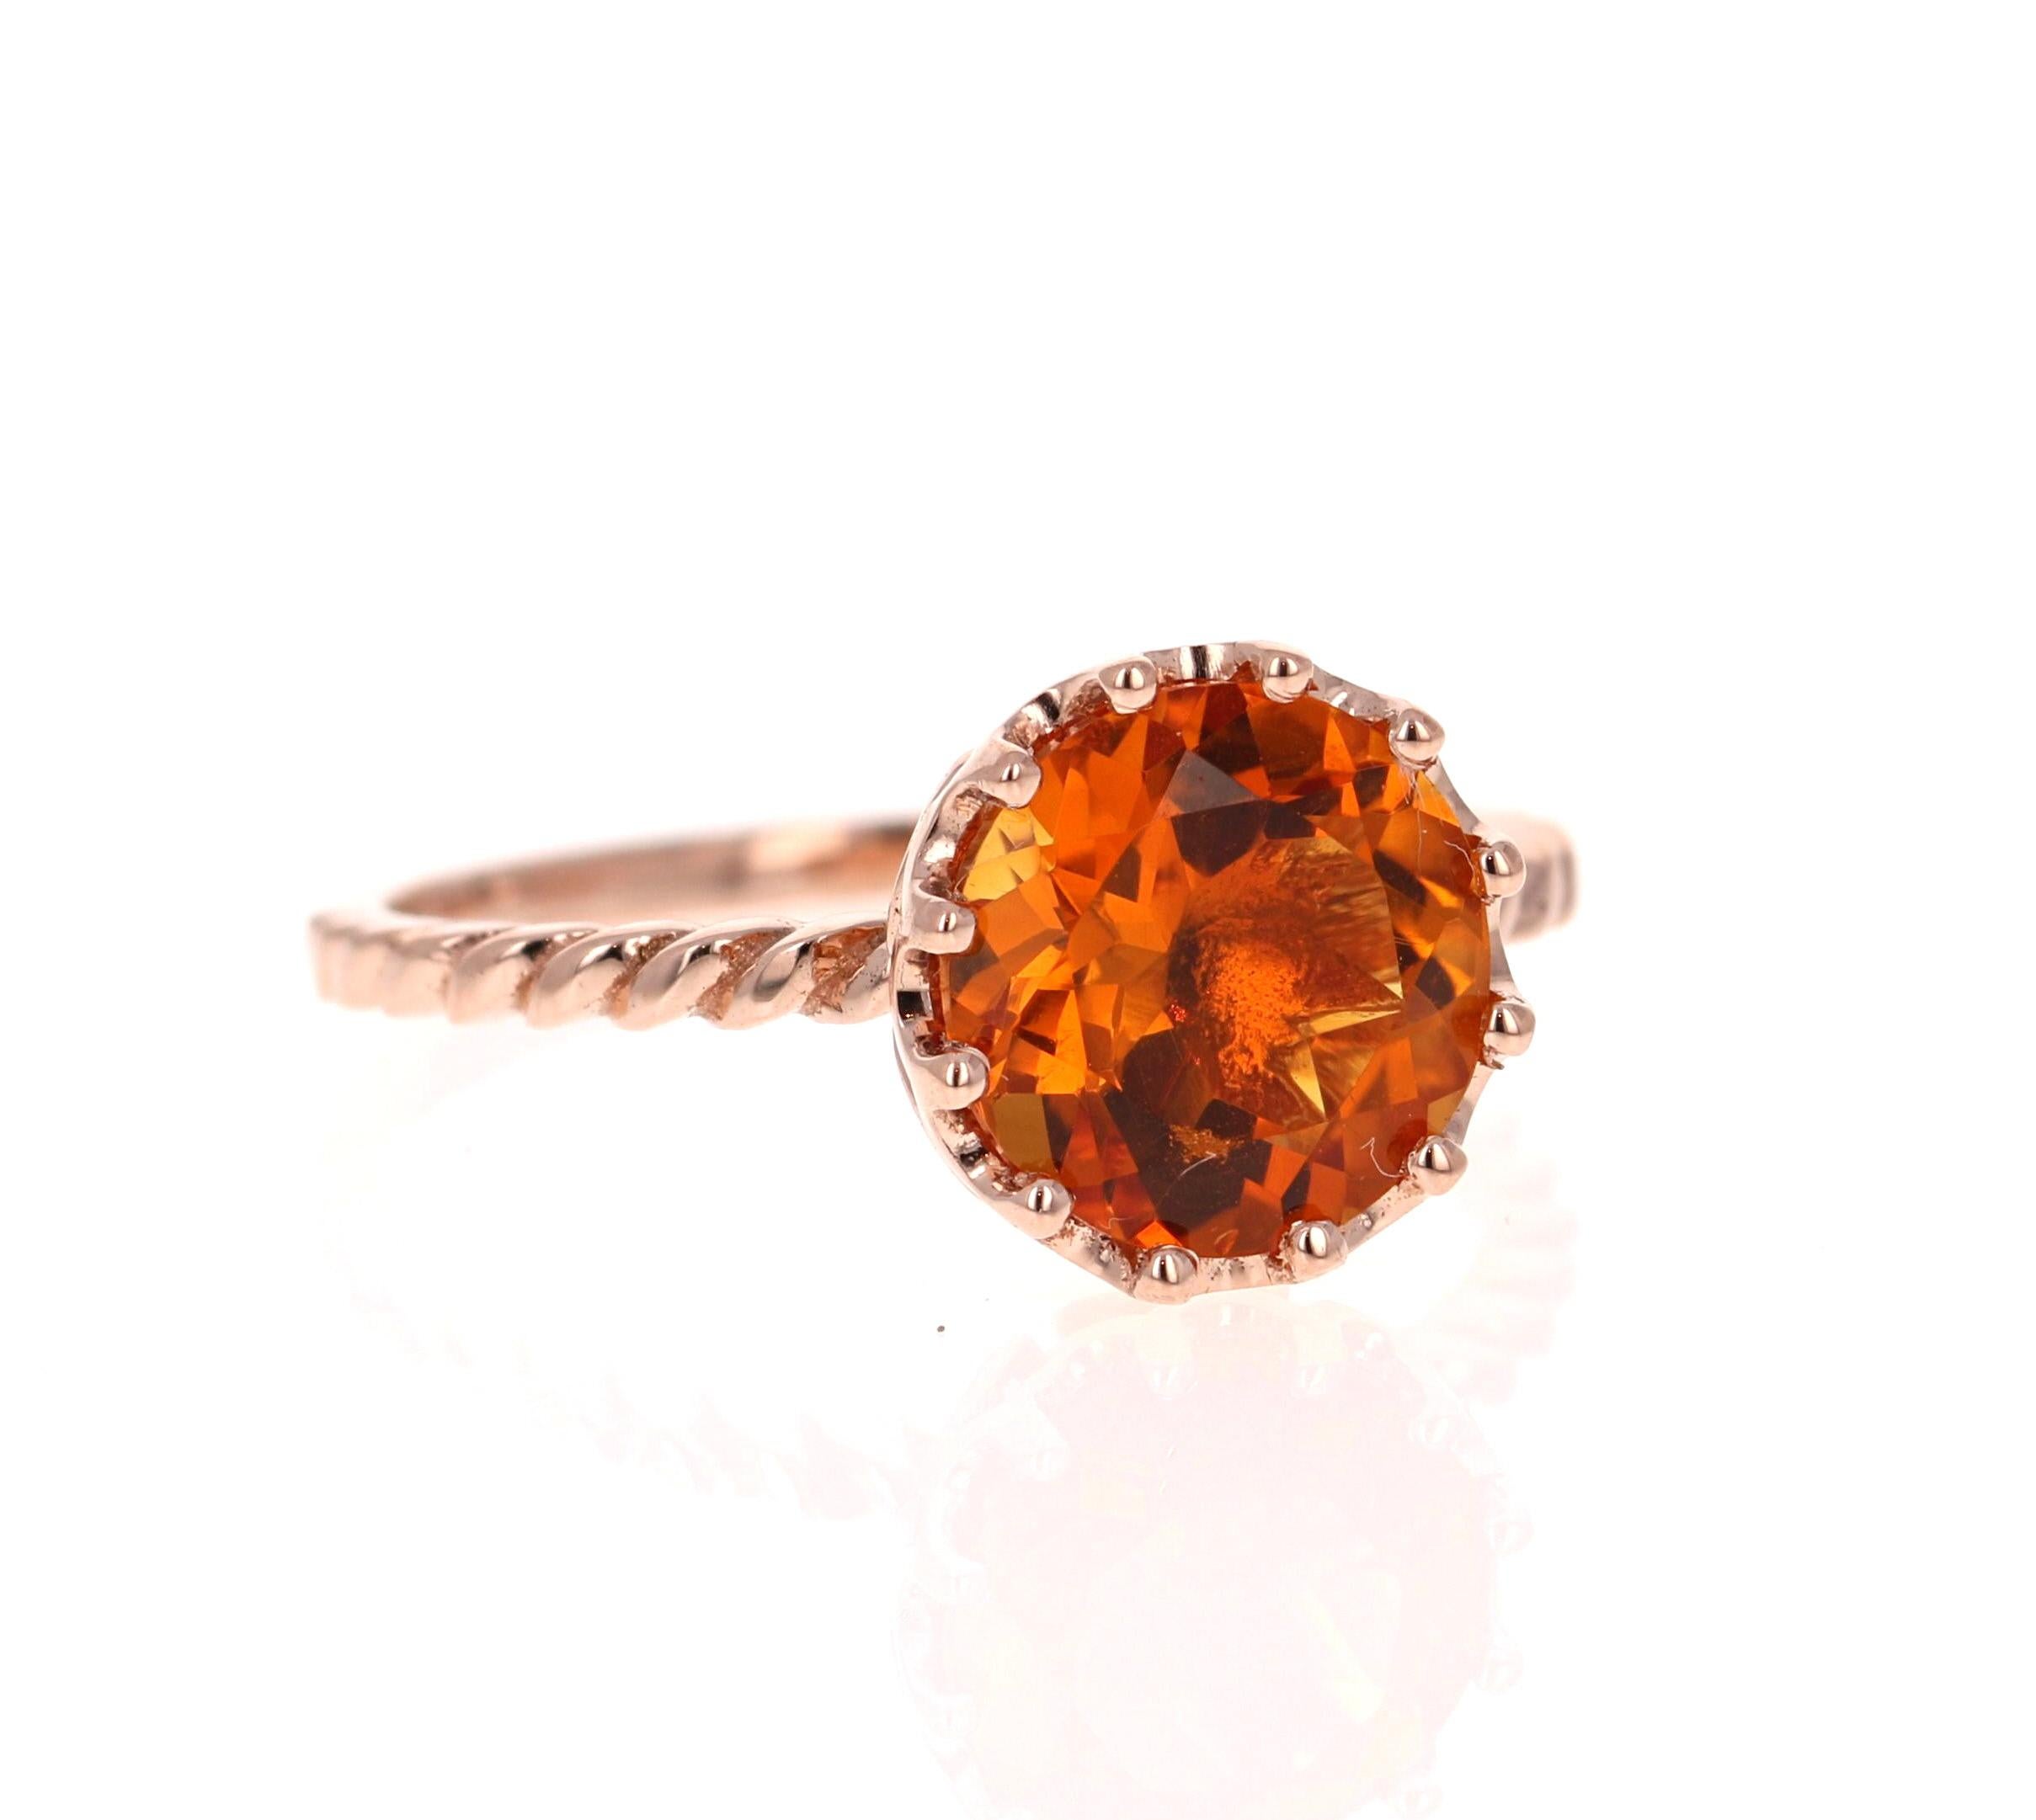 This beautiful and simple ring has a bright and vivid Round Cut Citrine Quartz in the center that weighs 2.15 Carats. 
It is set in a beautifully crafted wire style 14 Karat Rose Gold setting and weighs approximately 2.3 Grams. Very light weight and